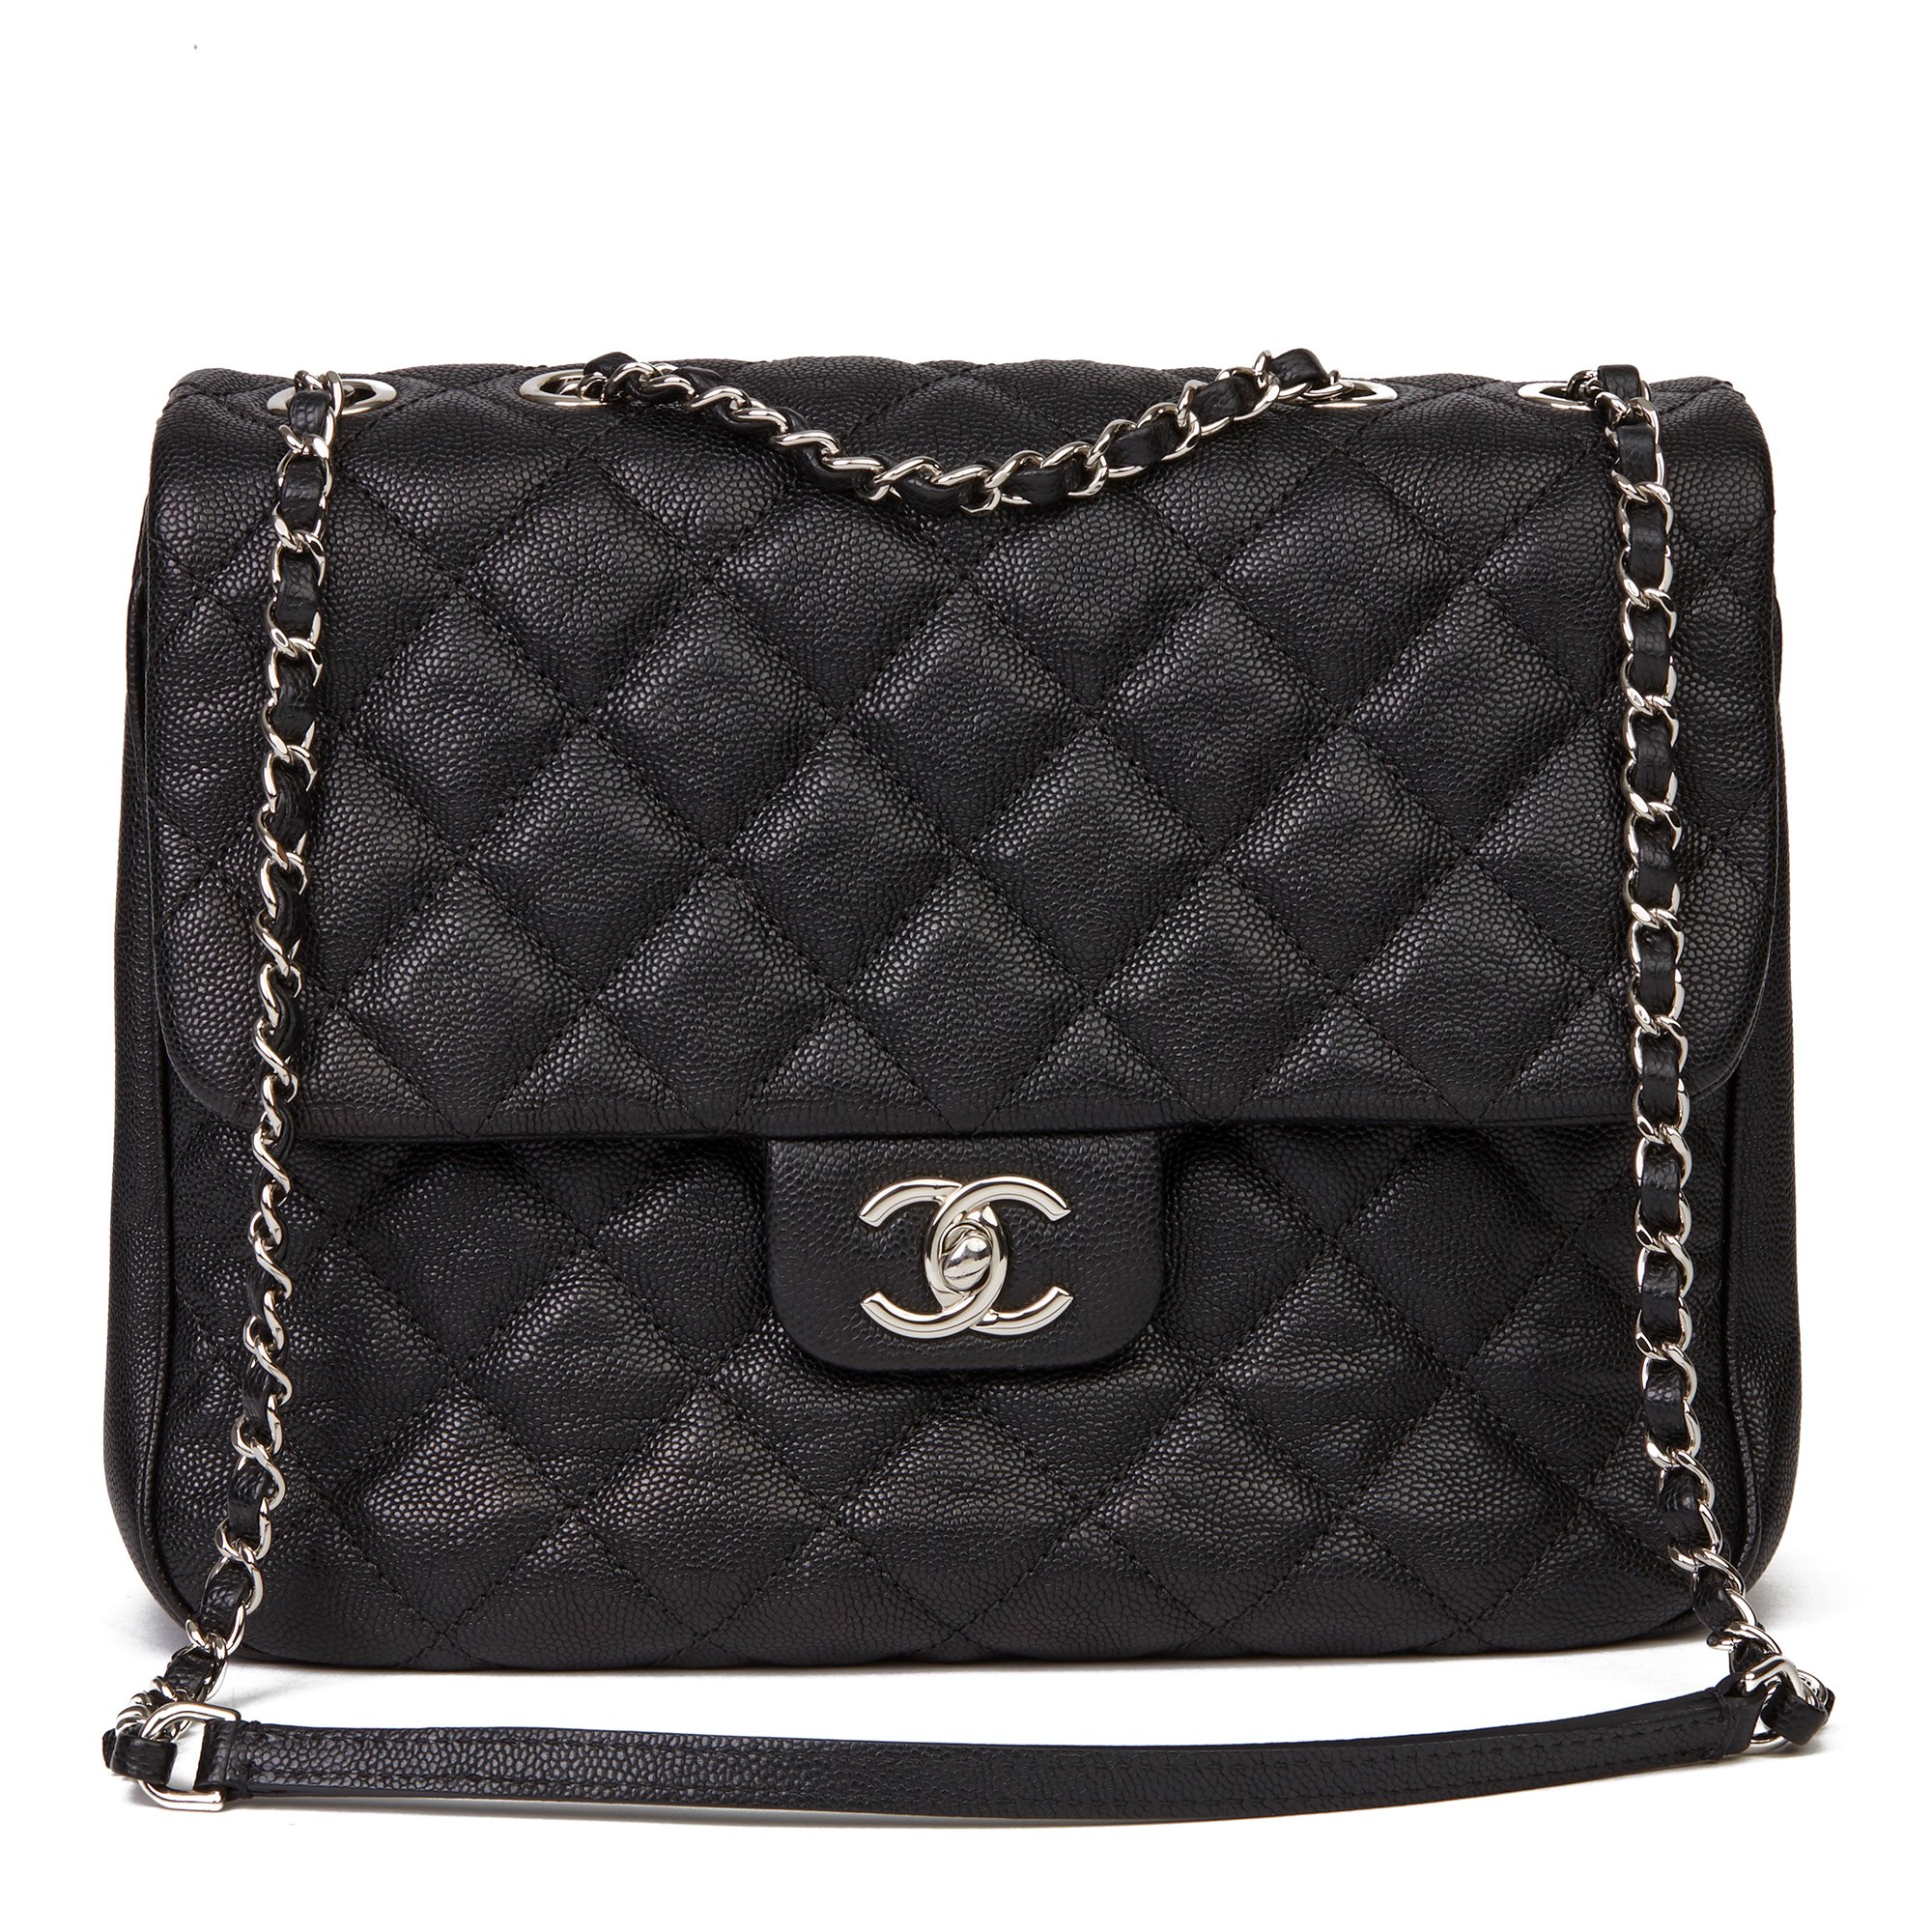 Chanel Purses For Sale | IQS Executive